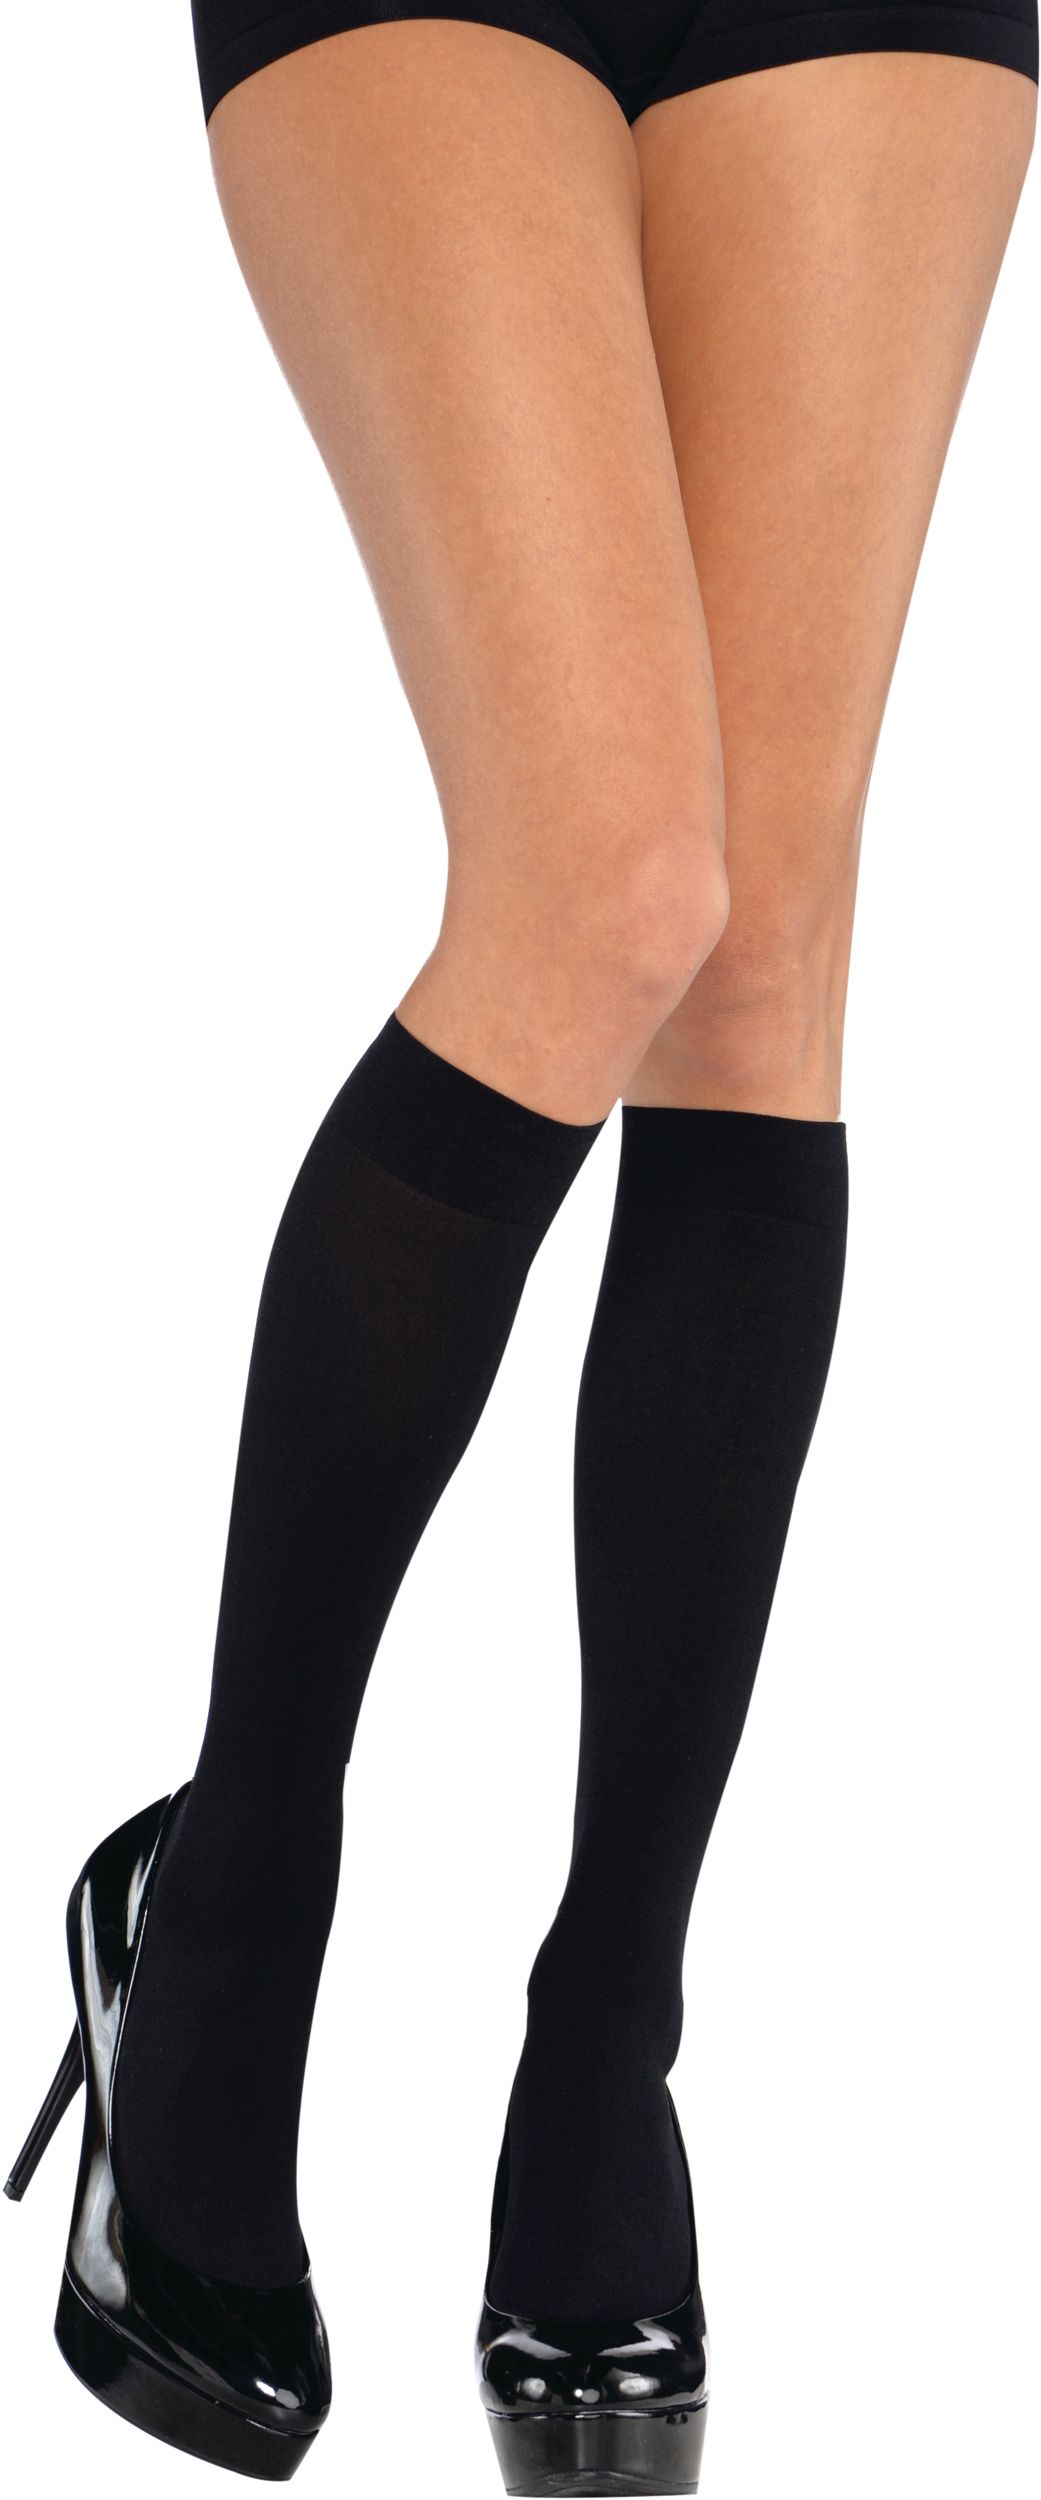 Adult Knee-High Stocking Tights, Black, One Size, Wearable Costume